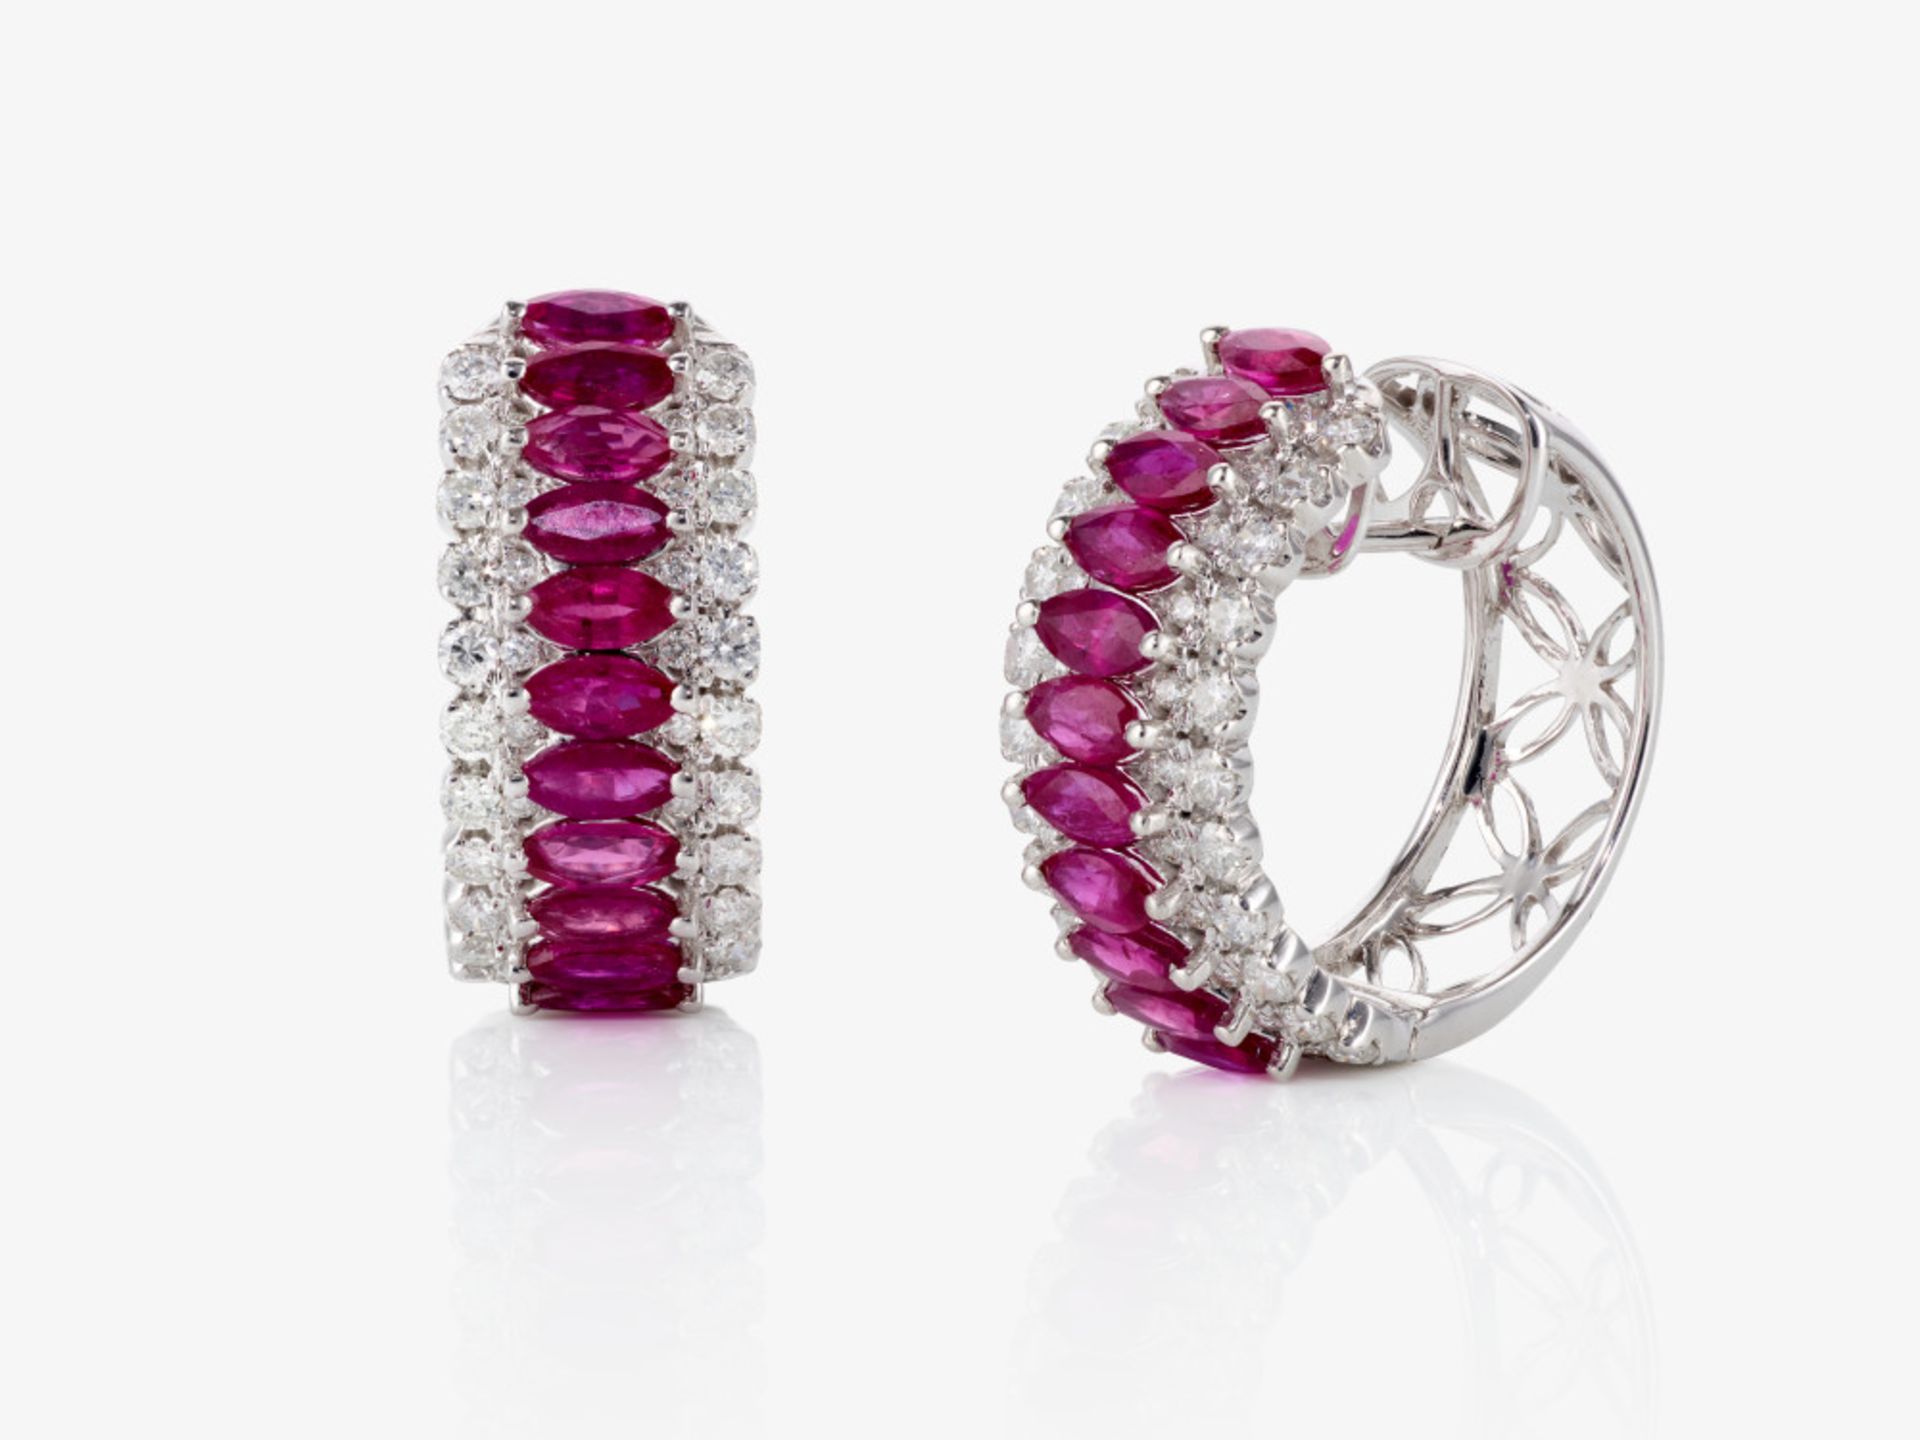 A pair of hoop earrings decorated with rubies and brilliant-cut diamonds - Italy 